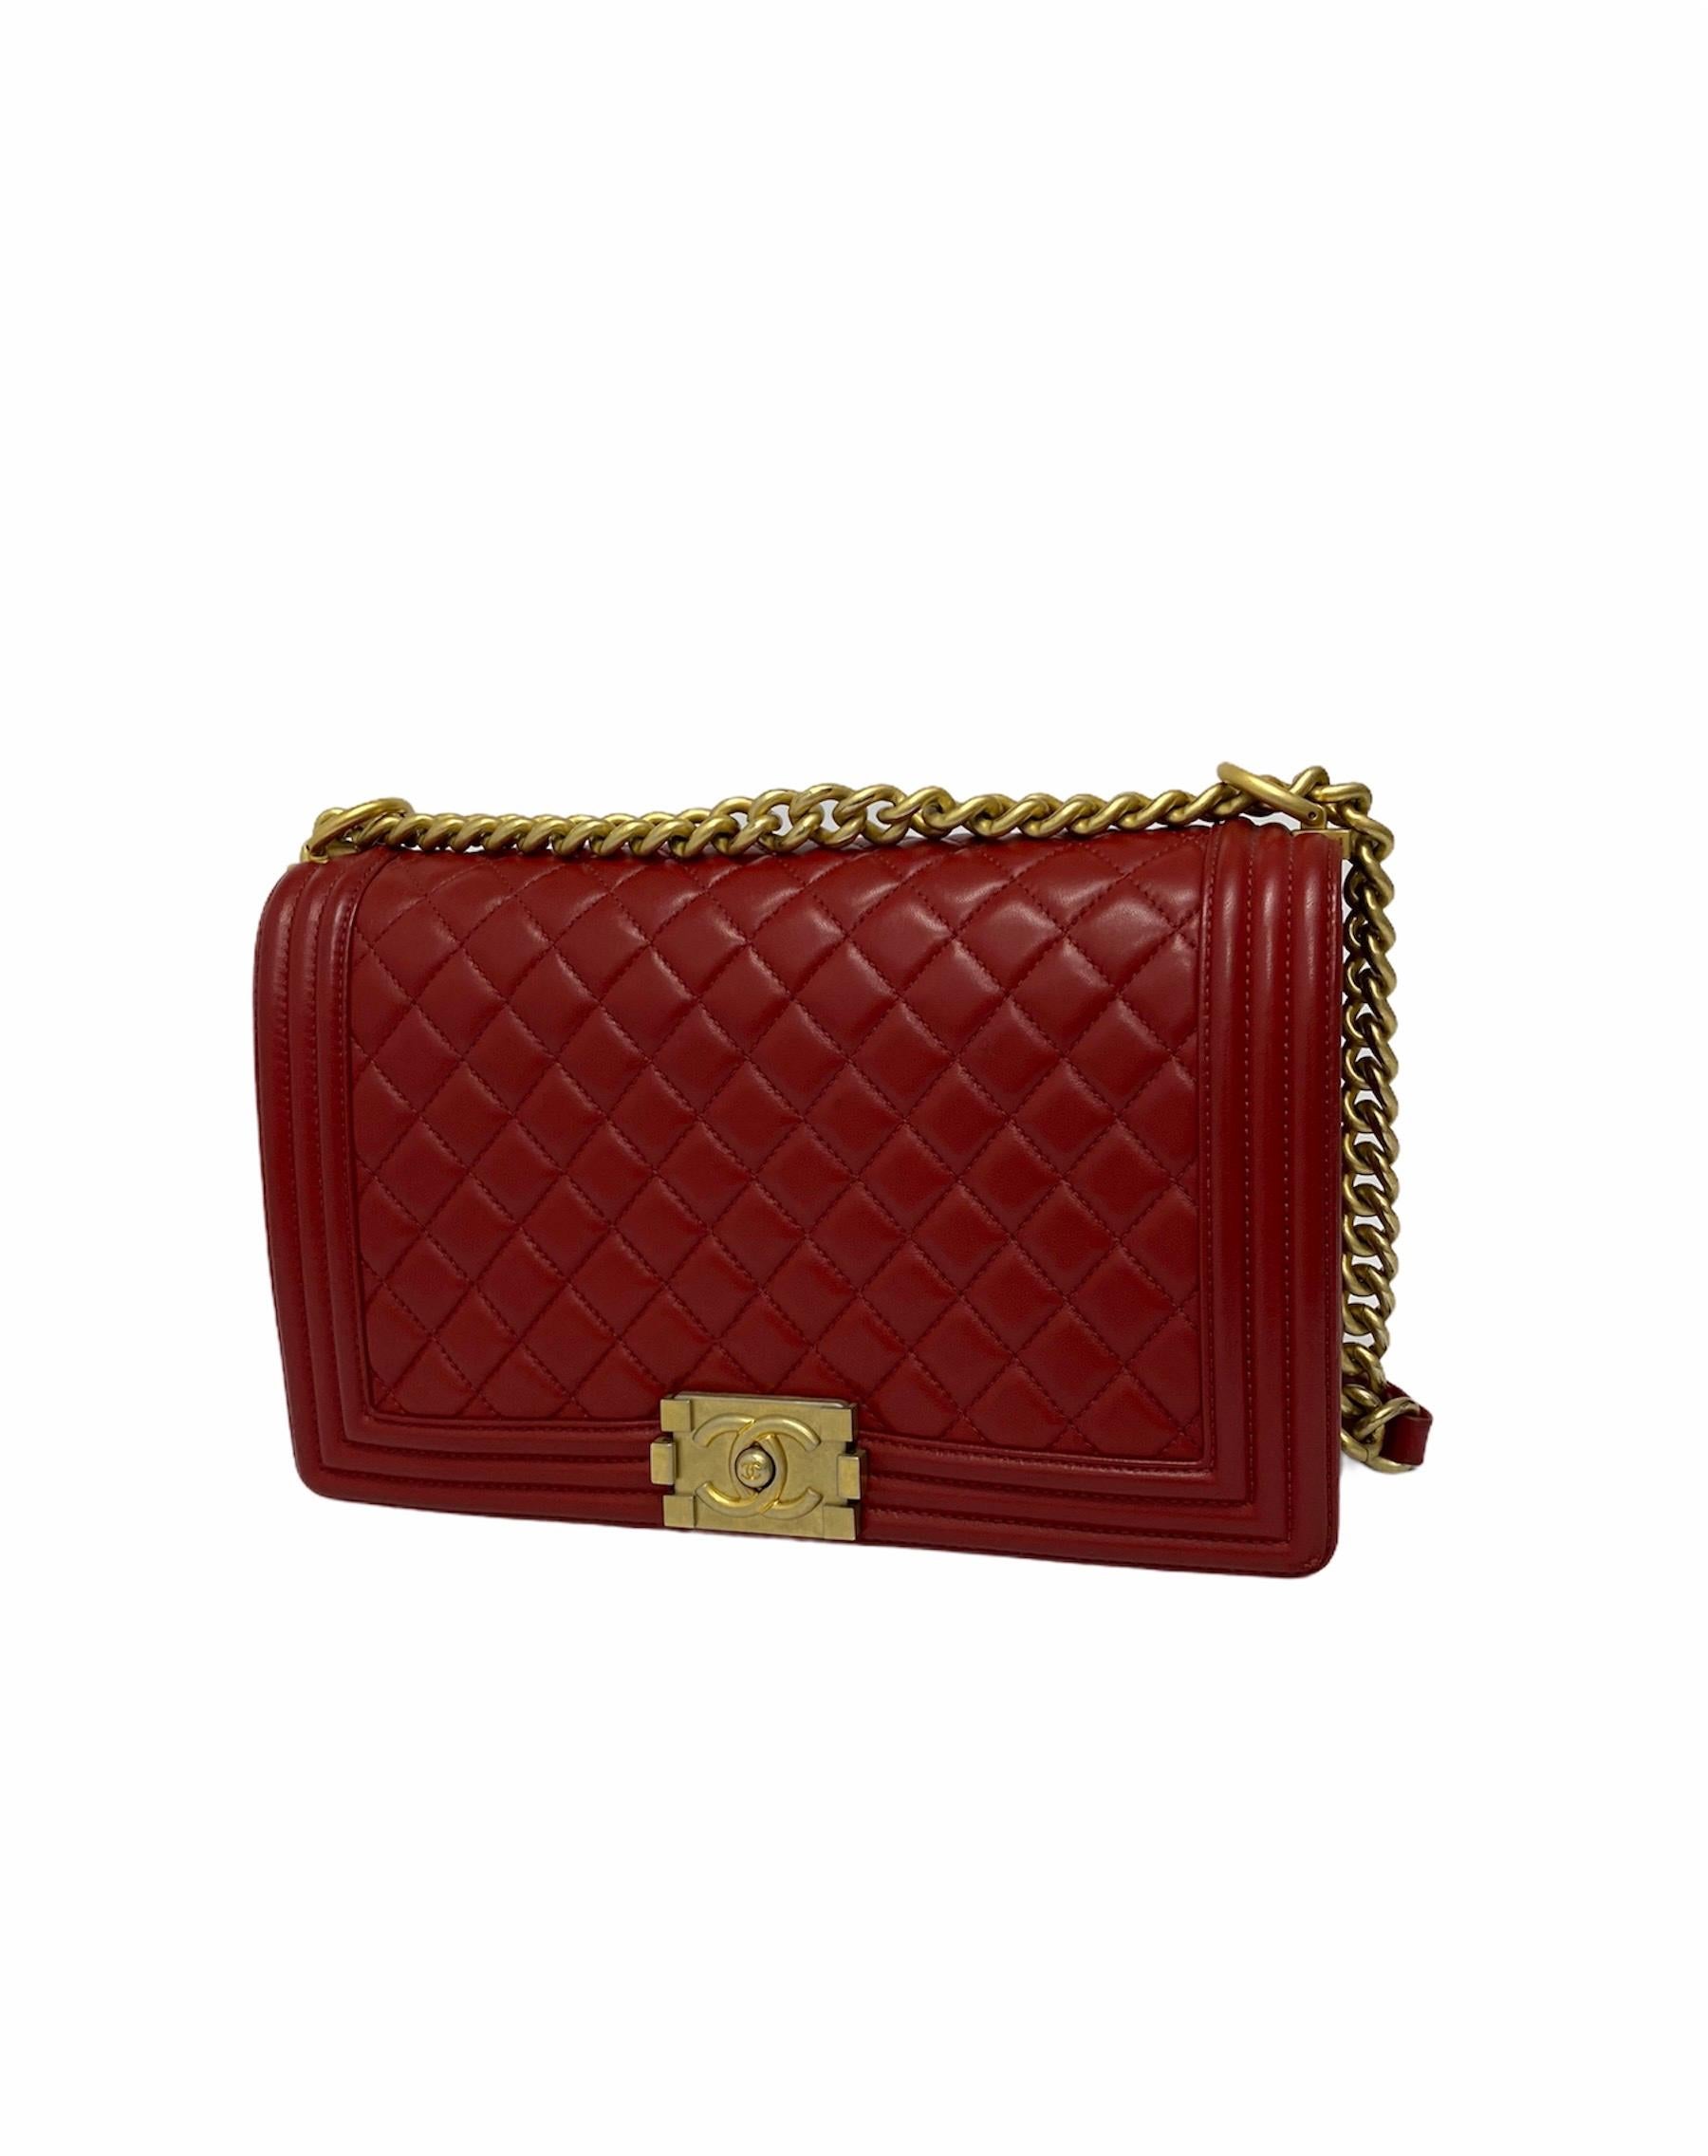 Women's Chanel Red Leather Boy Bag